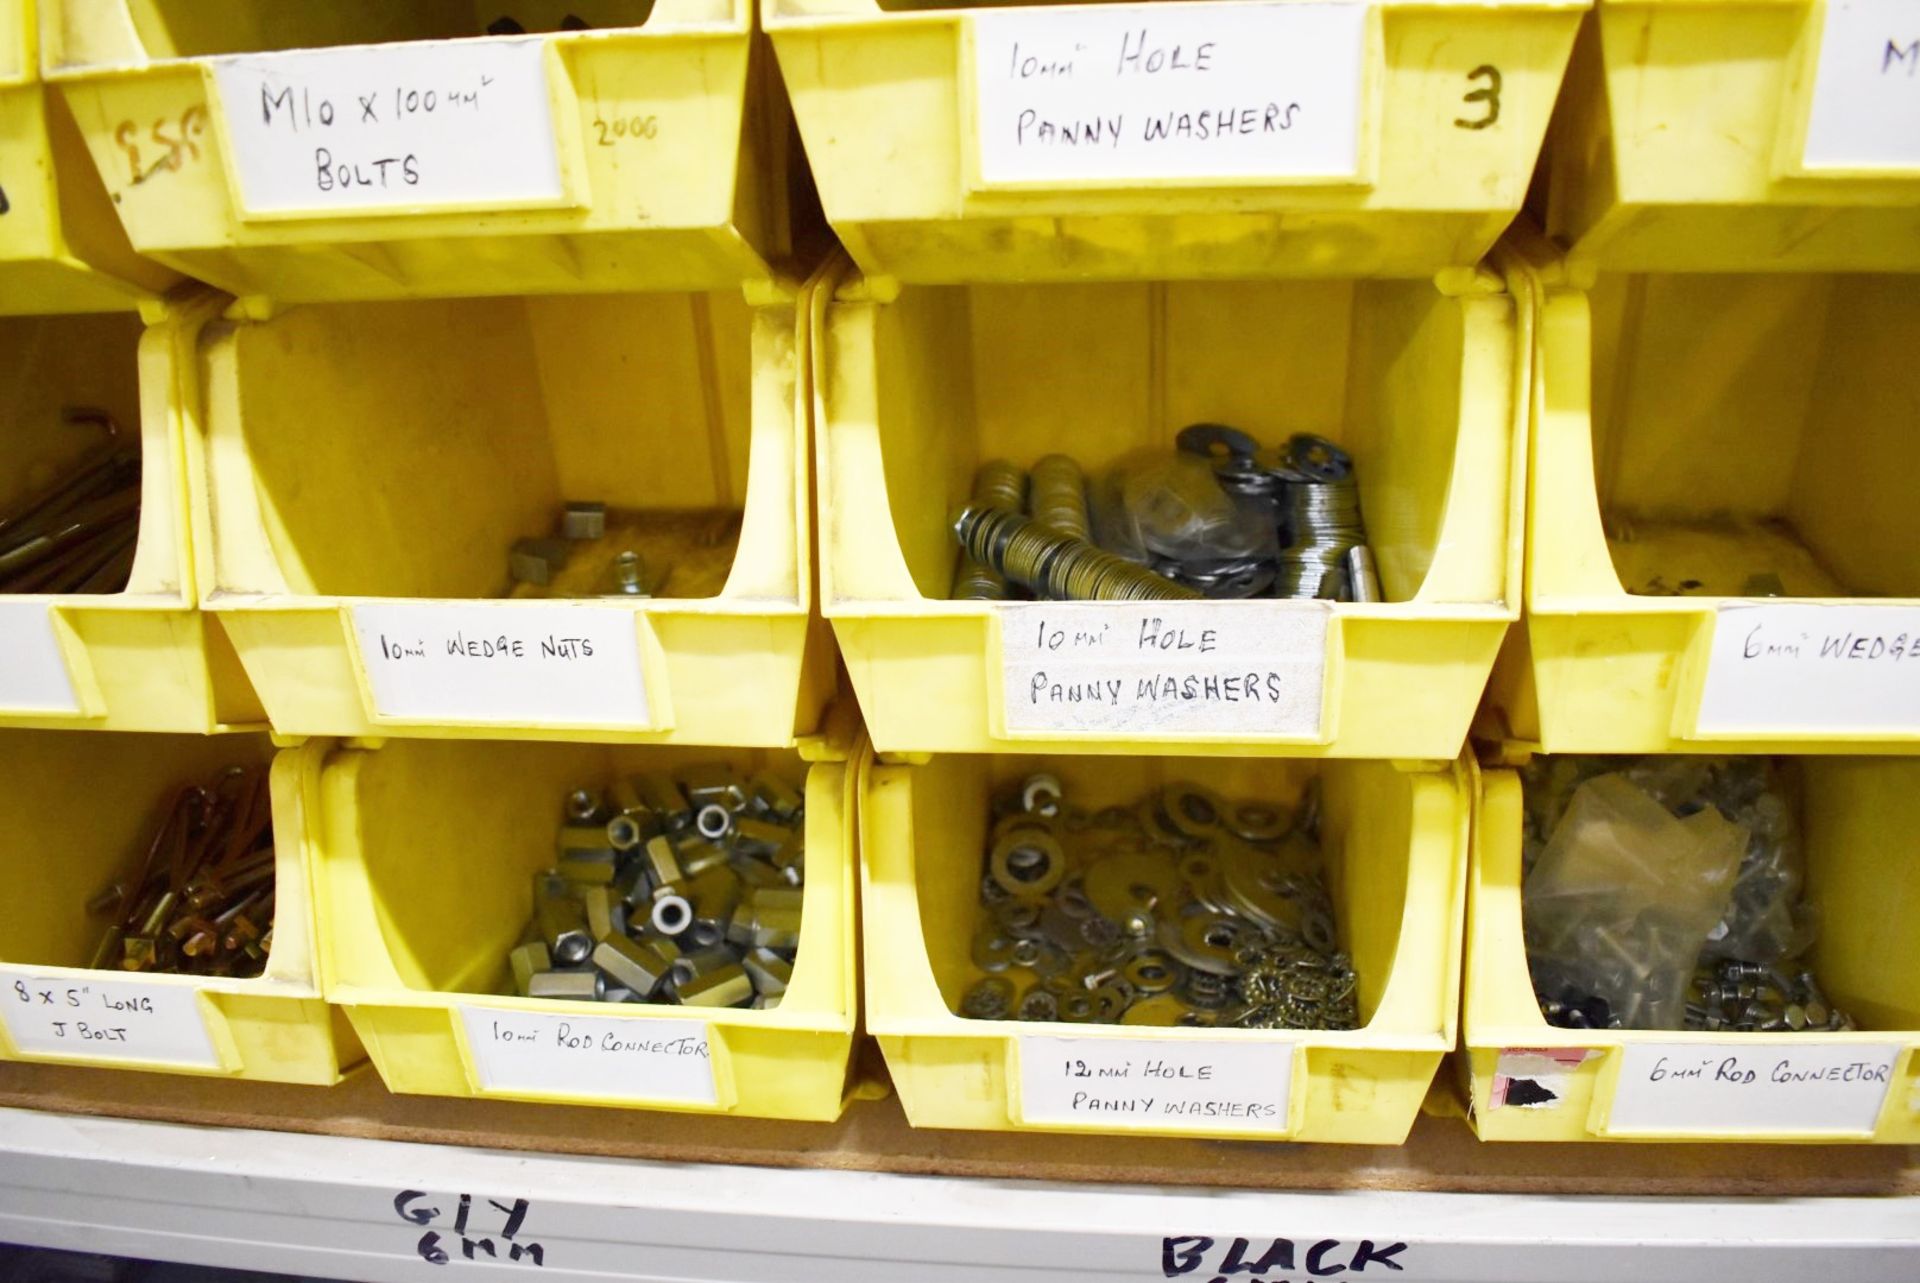 43 x Linbins With Contents - Clamps, Rod Connectors, Zebs, Washers, Bolts, Hex Nuts, Cleats & More! - Image 16 of 37